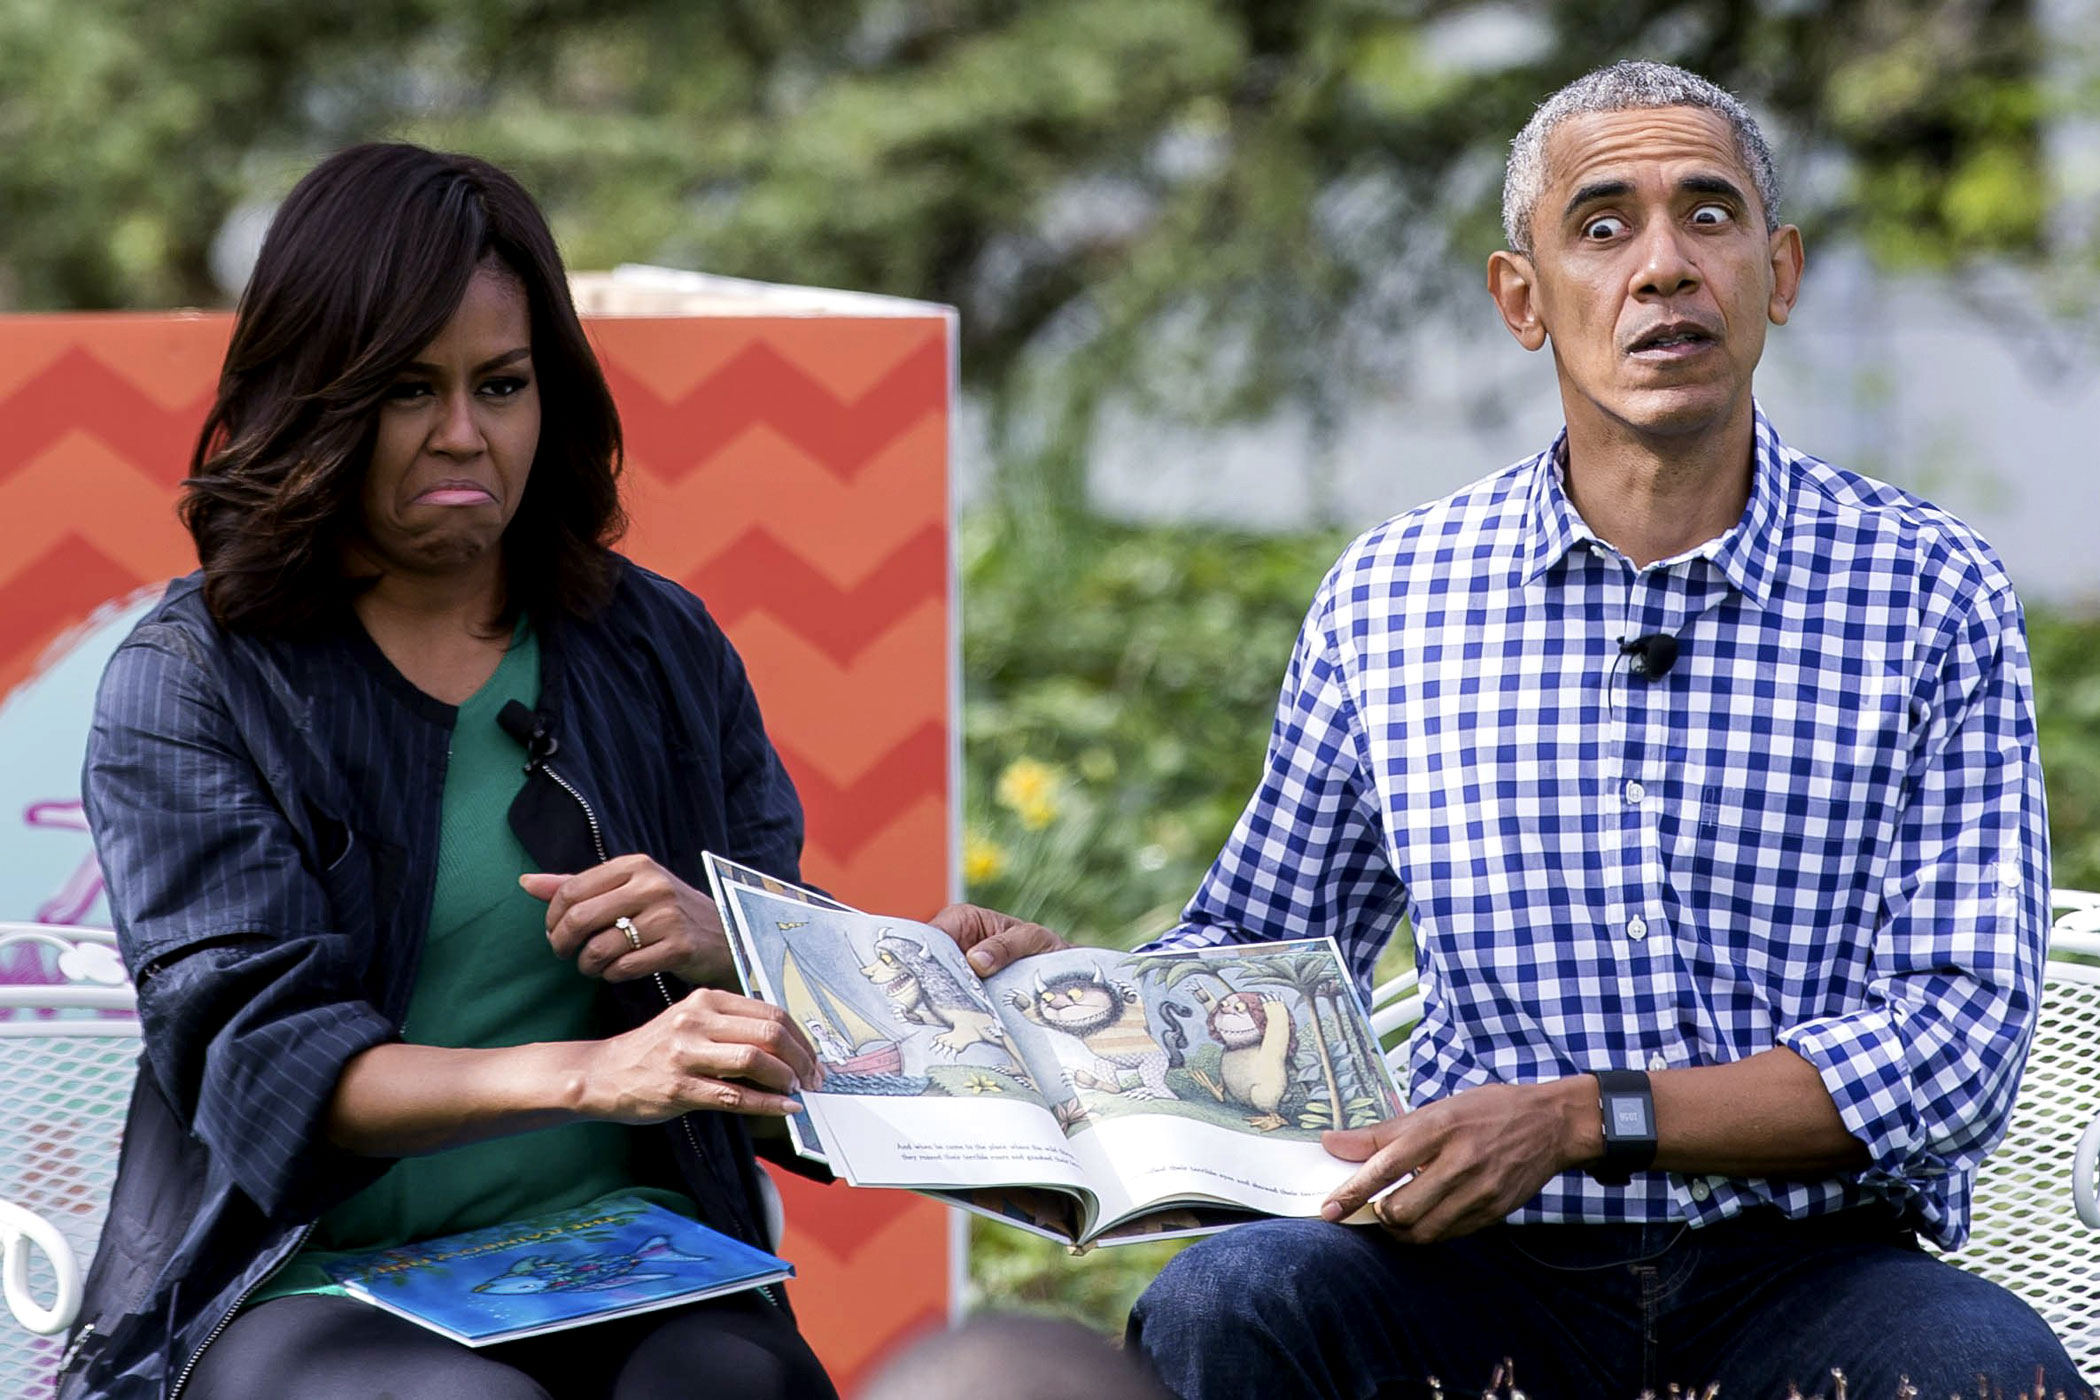 President Barack Obama and First Lady Michelle Obama read the book "Where the Wild Things Are" to a group of children during the 138th annual White House Easter Egg Roll in Washington on March 28, 2016.